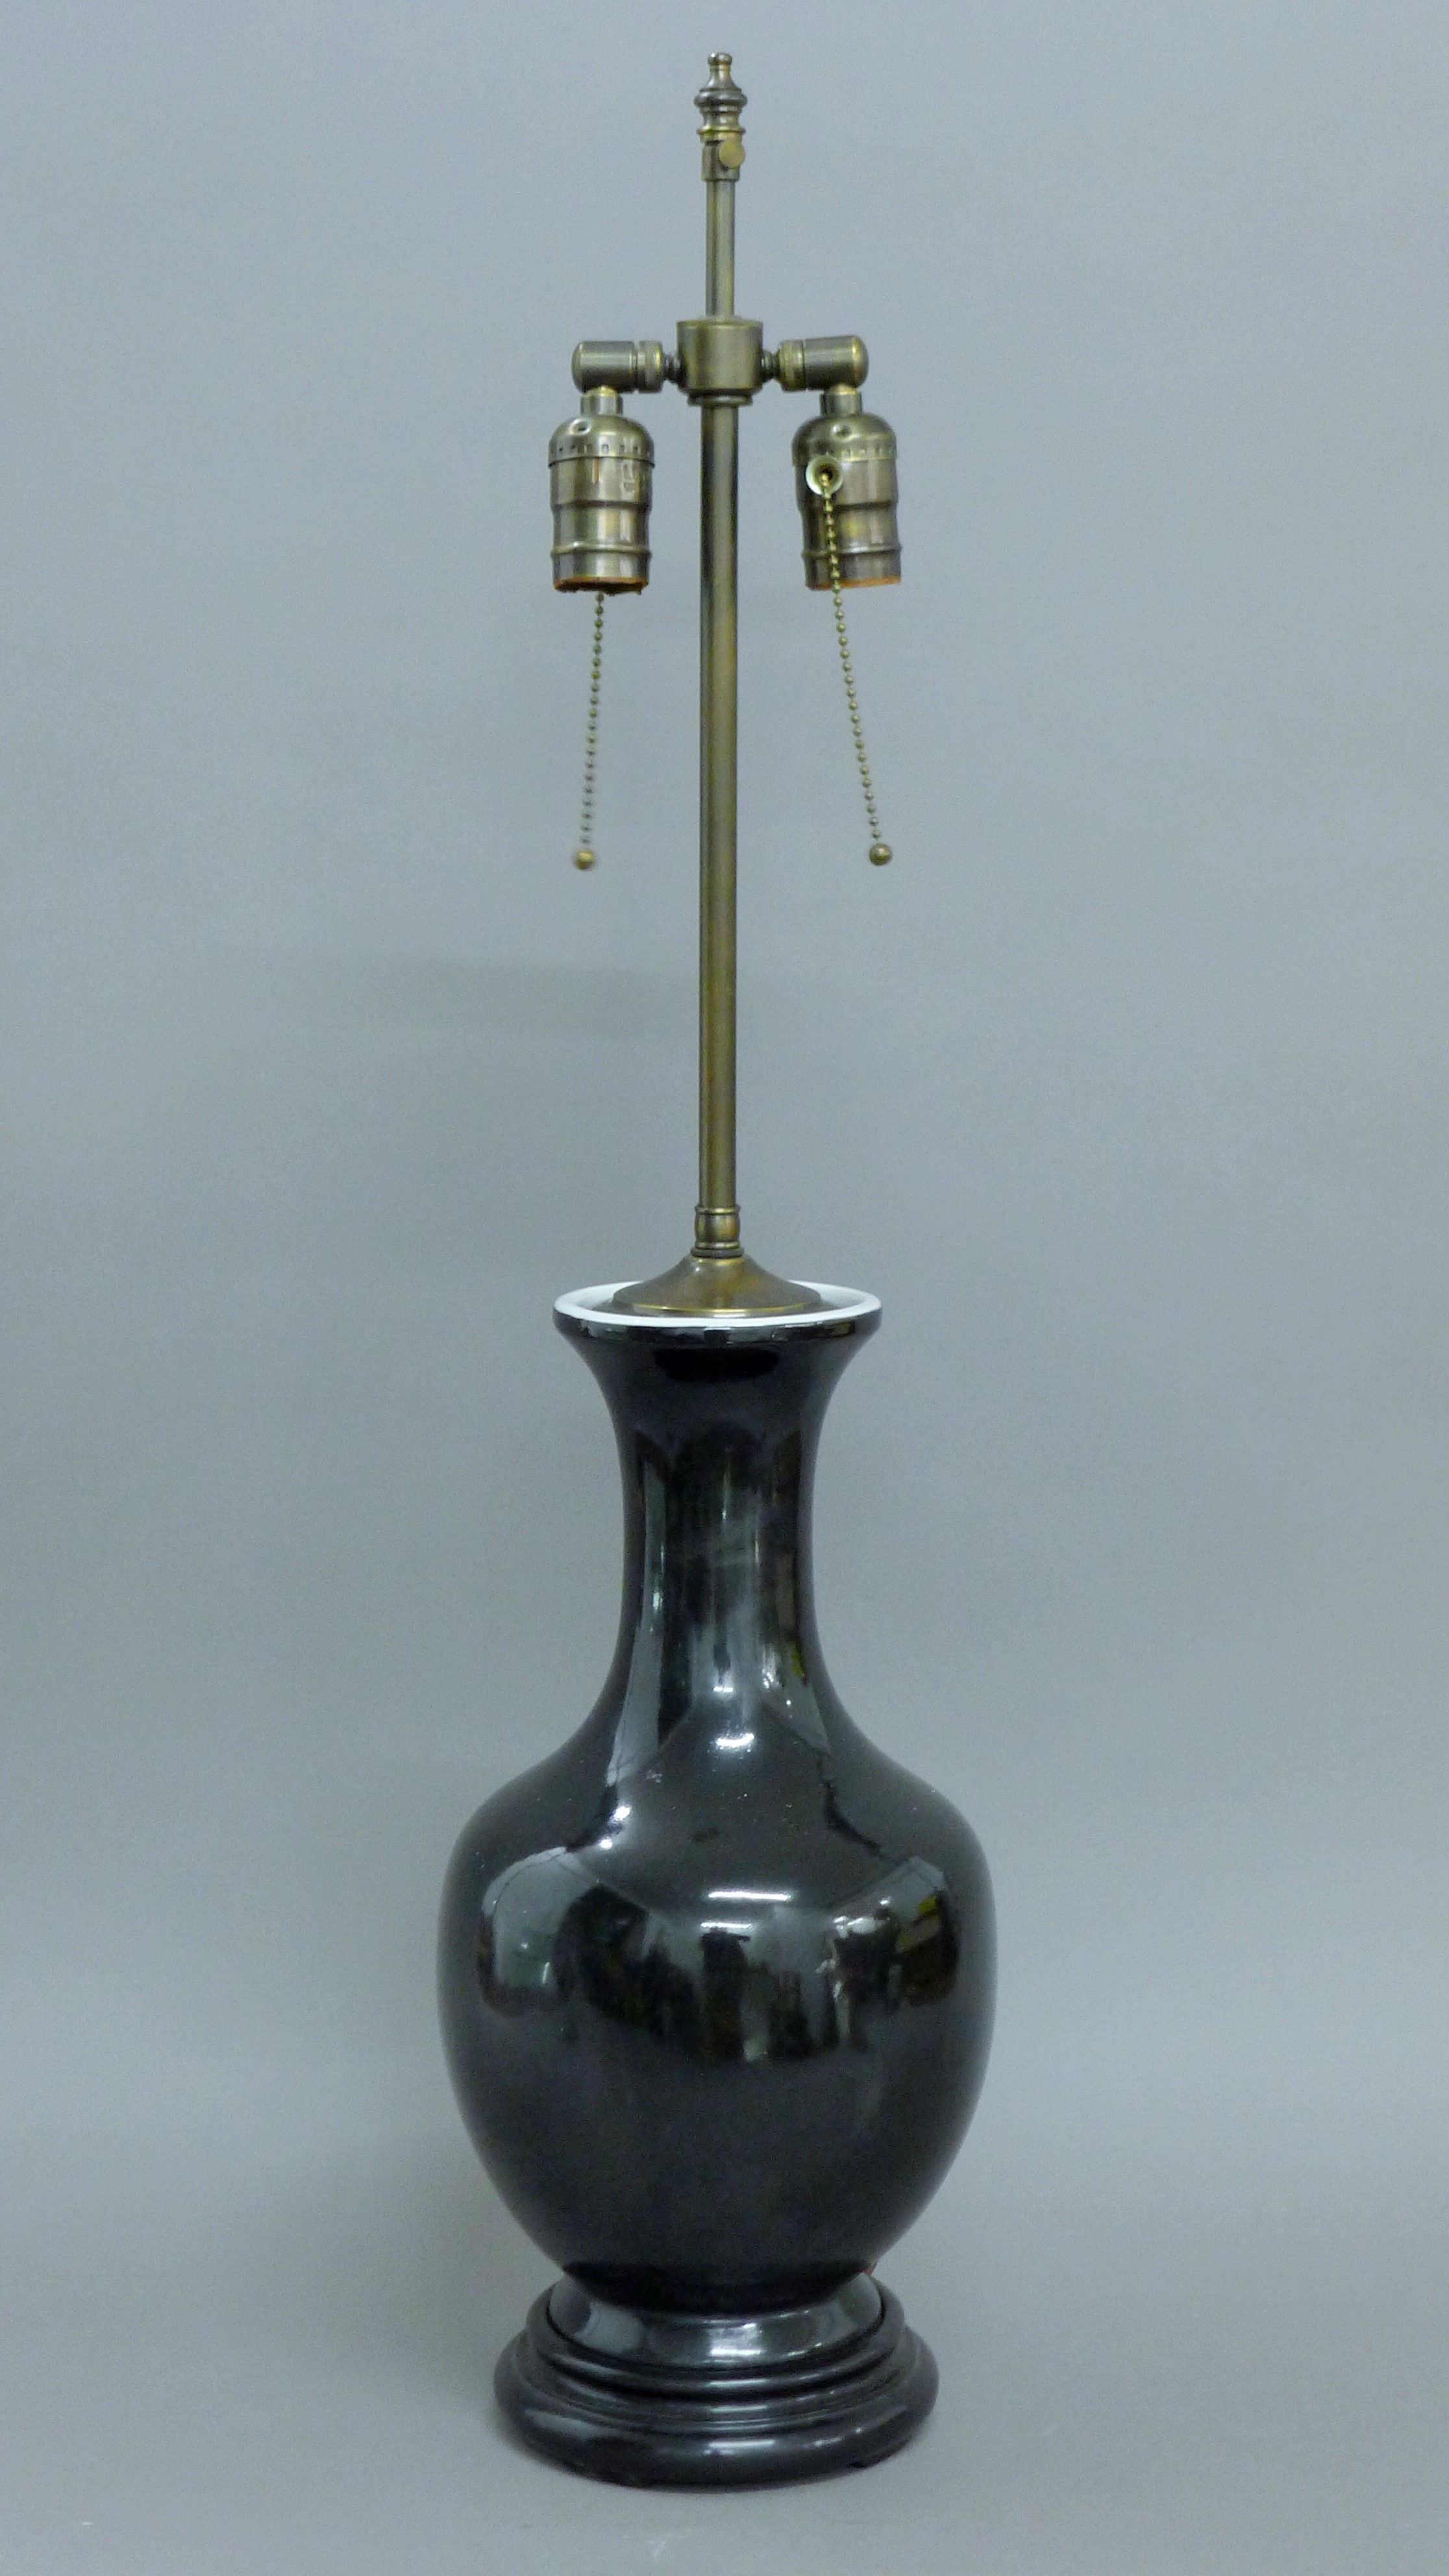 A Chinese black porcelain lamp. 81 cm high overall.